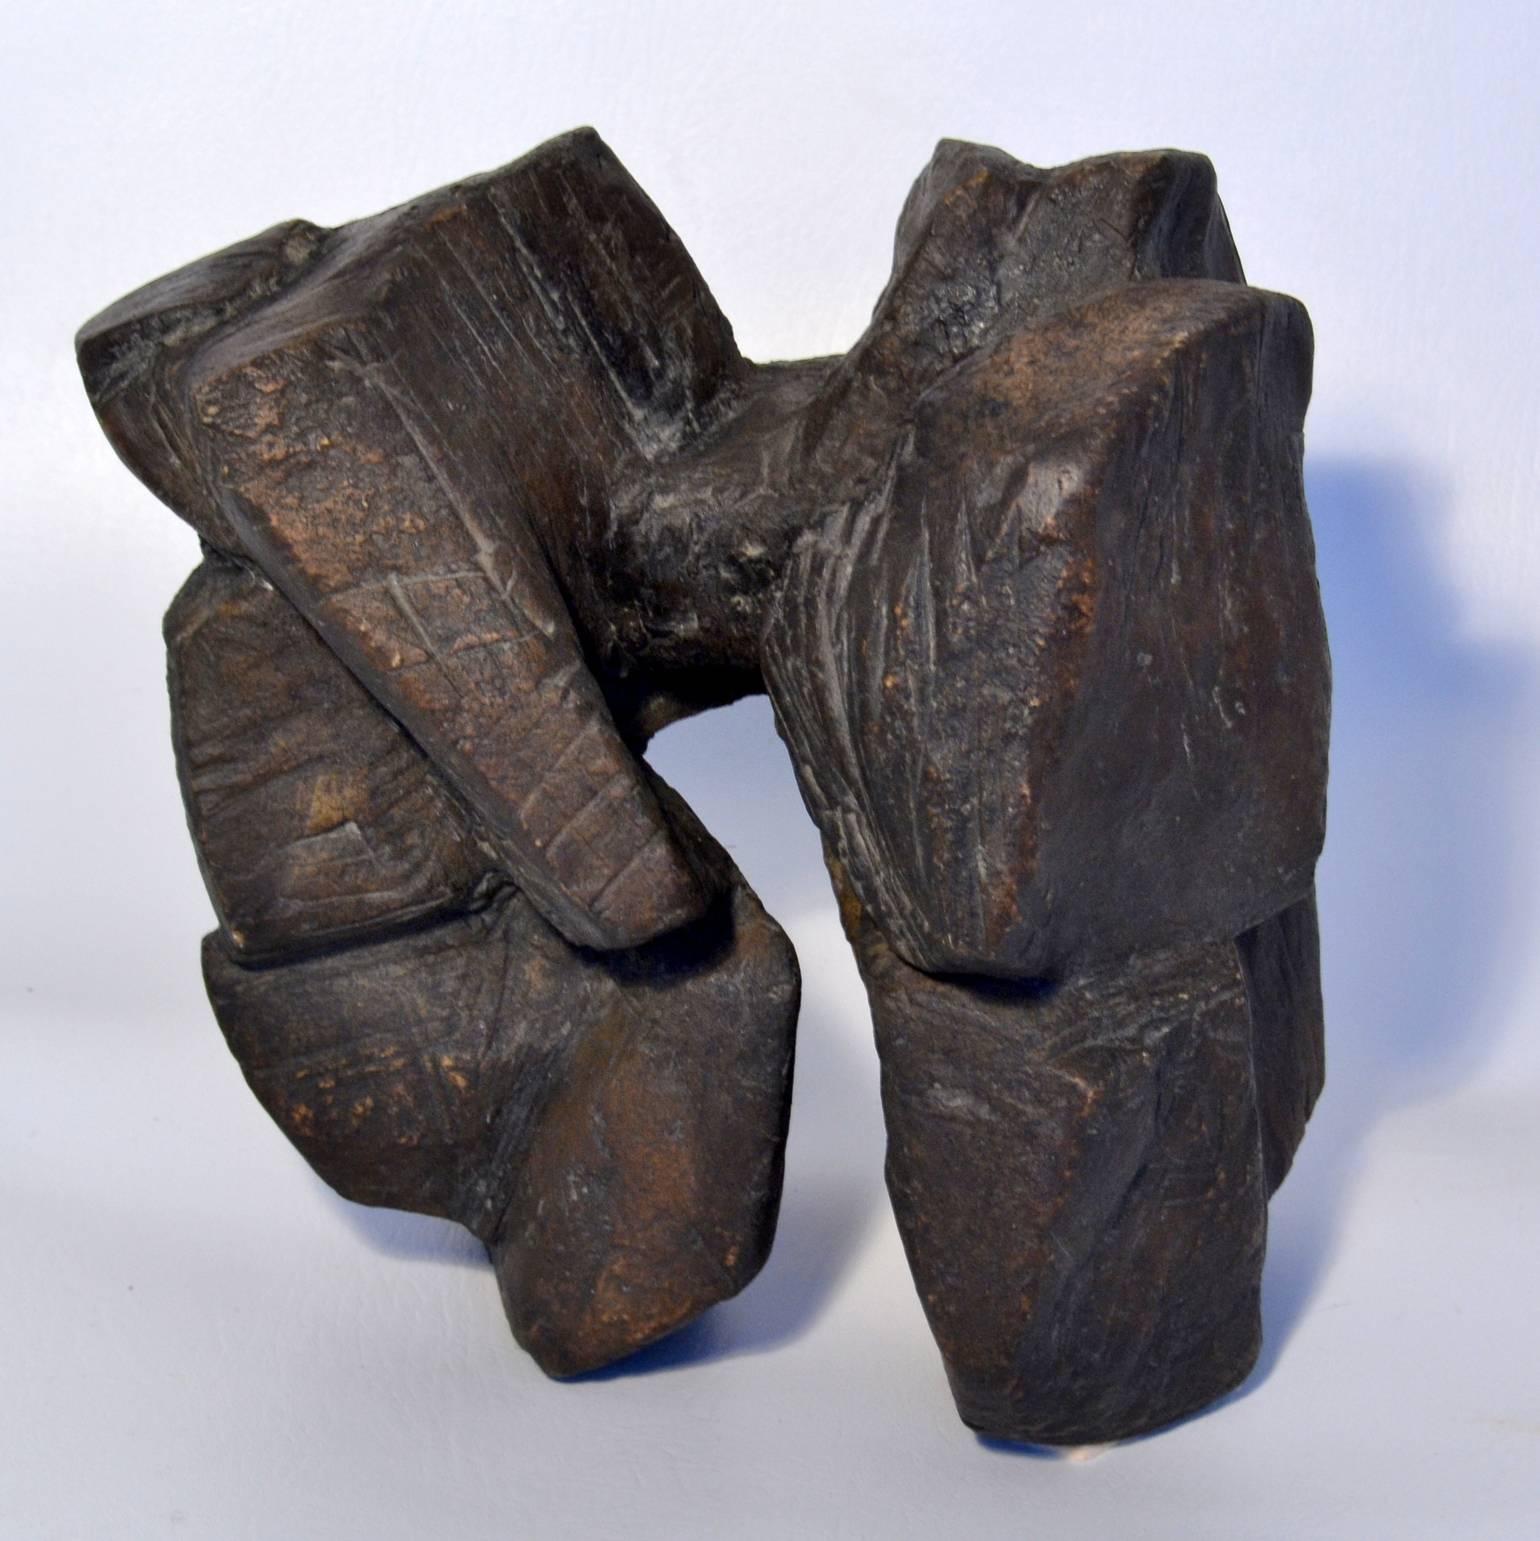 His hand formed sculpture echoes a voyage of discovery in not just the visible natural world of trees, rocks but the city and Industrial landscape with his exploration of space and form.

Bryan blow 1931-2009 was born and trained as an artist in